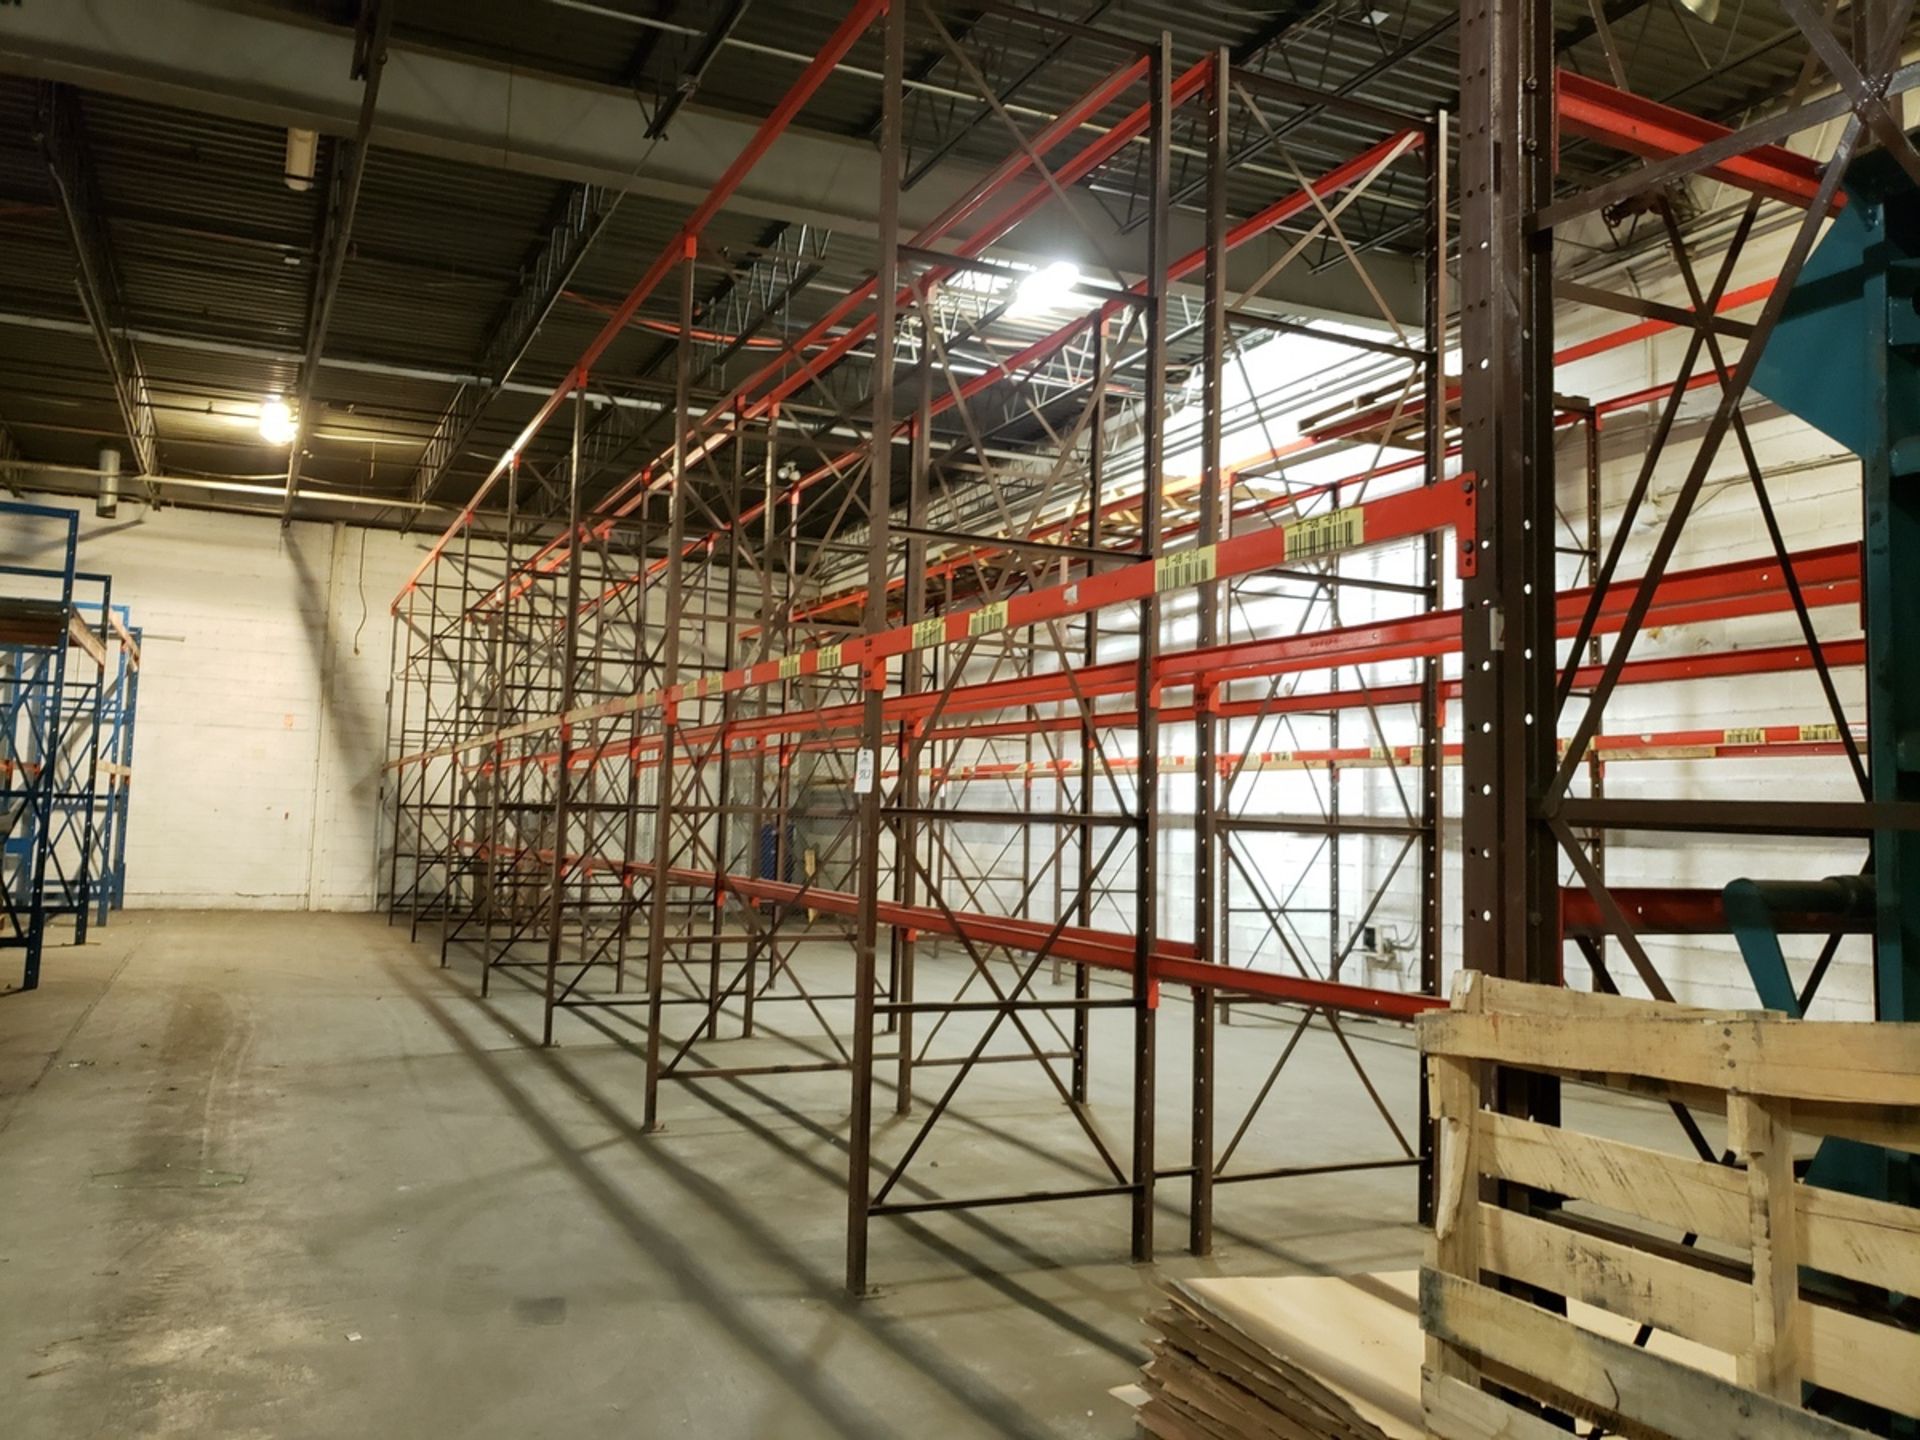 Lot of Pallet Racking, (20) 42" x 12' Uprights, (72) 8' Beams | Rig Fee: $2000